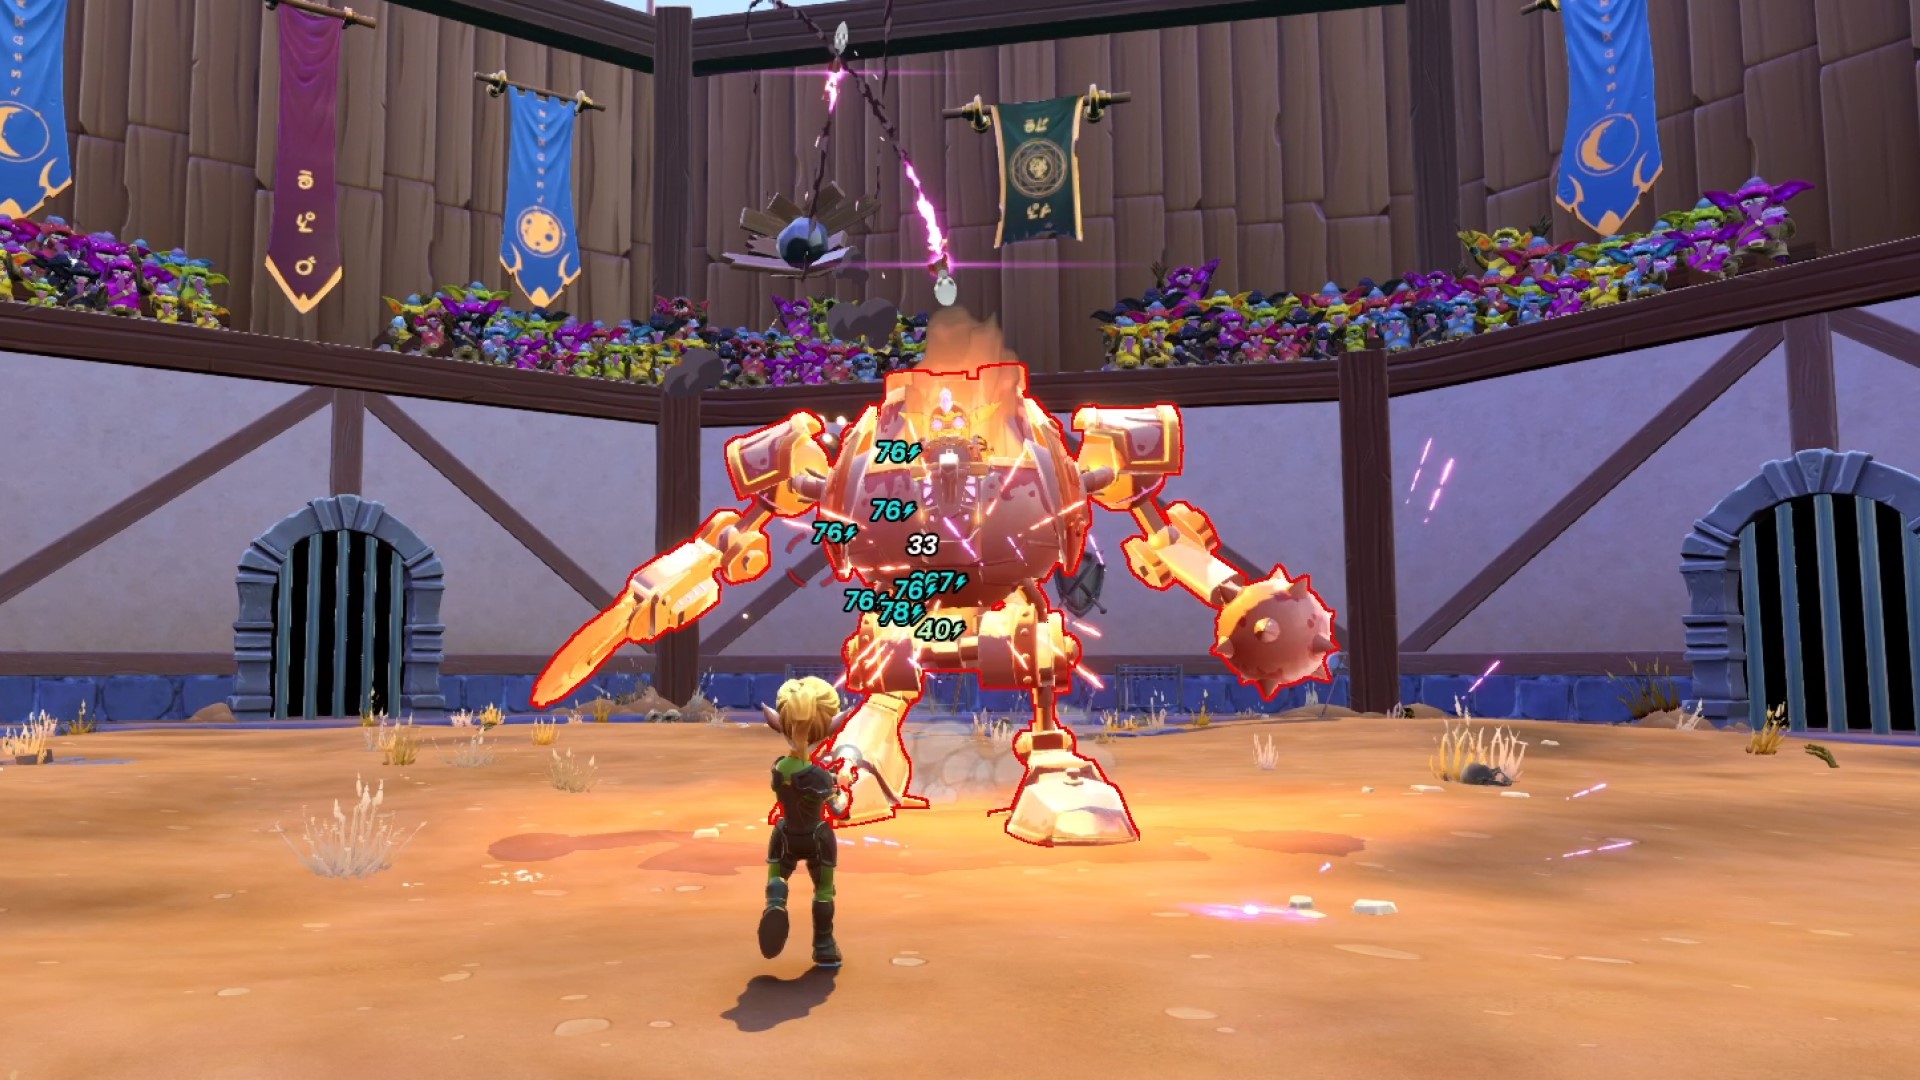 Dungeon Defenders is back as a co-op roguelike game